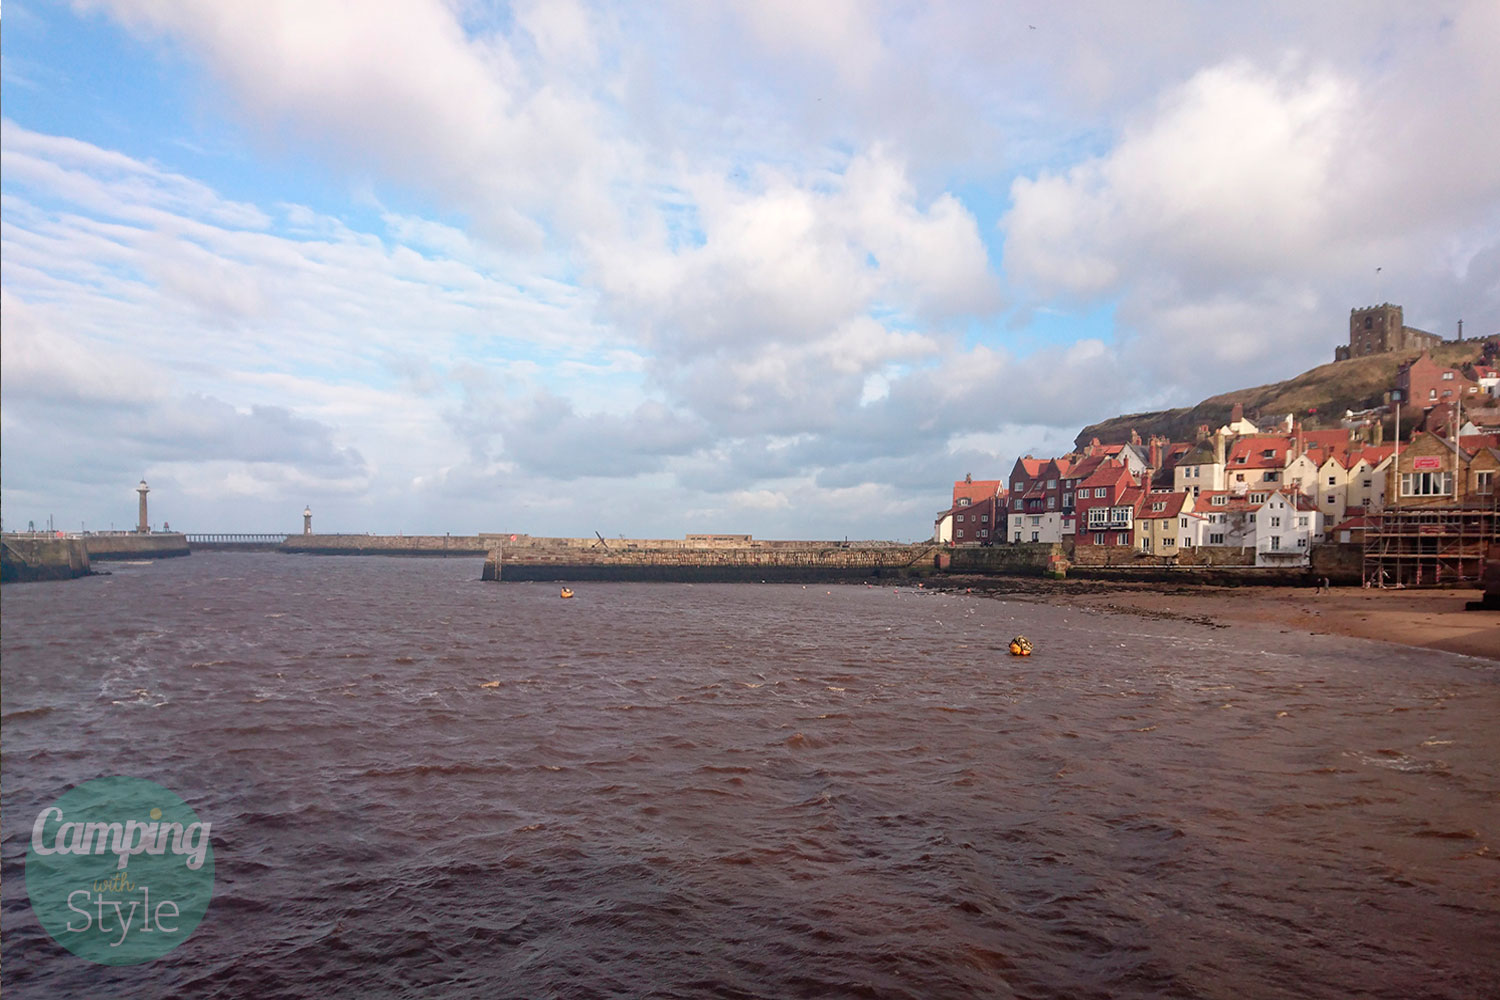  A Walk Around Whitby in Yorkshire